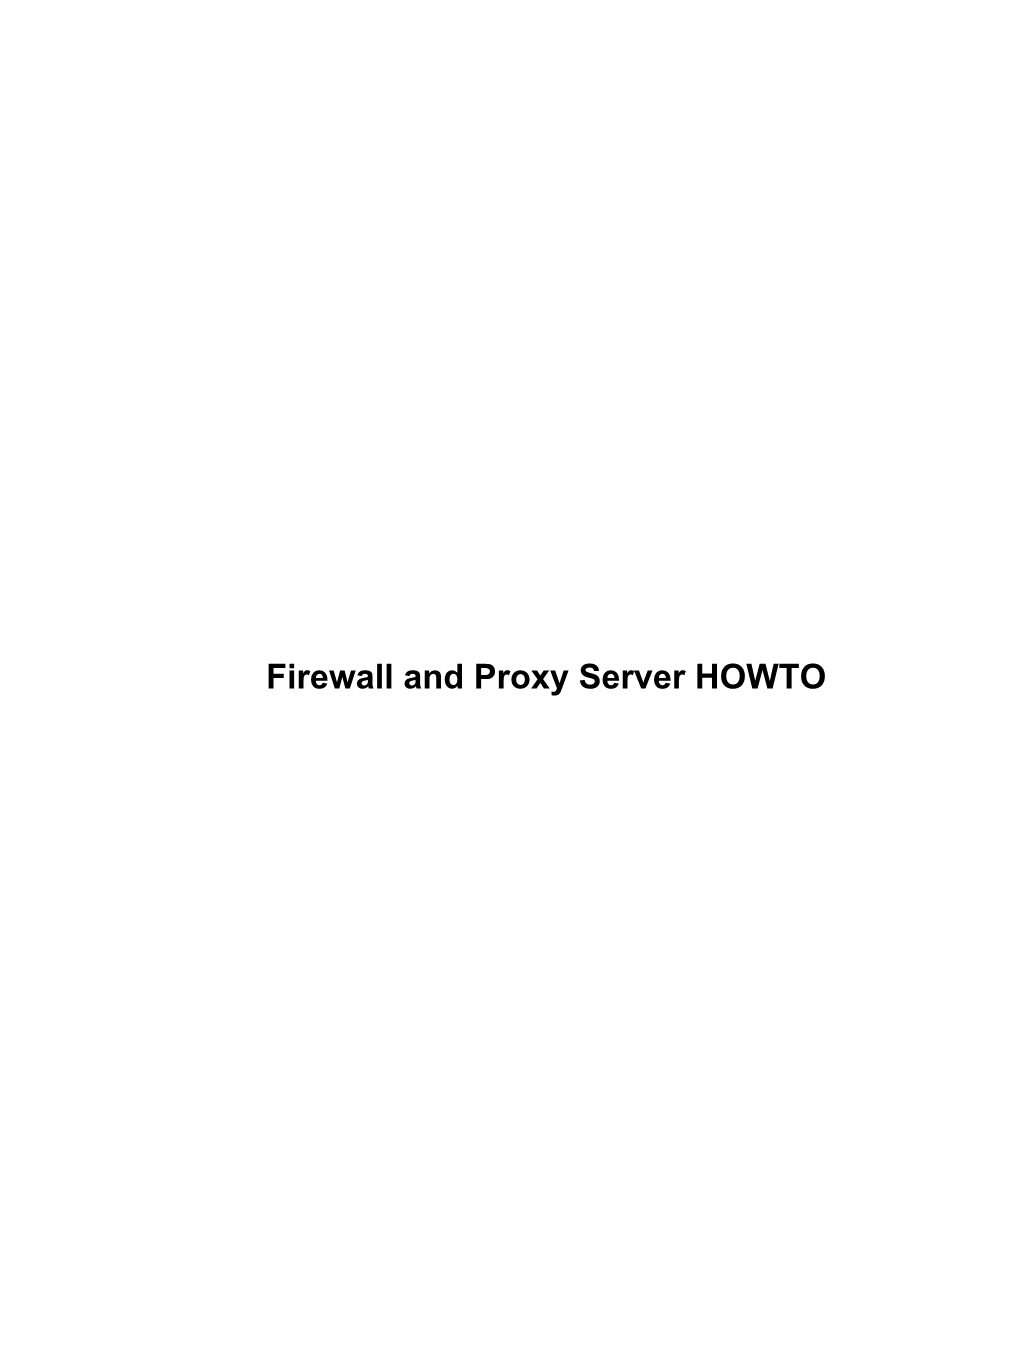 Firewall and Proxy Server HOWTO Firewall and Proxy Server HOWTO